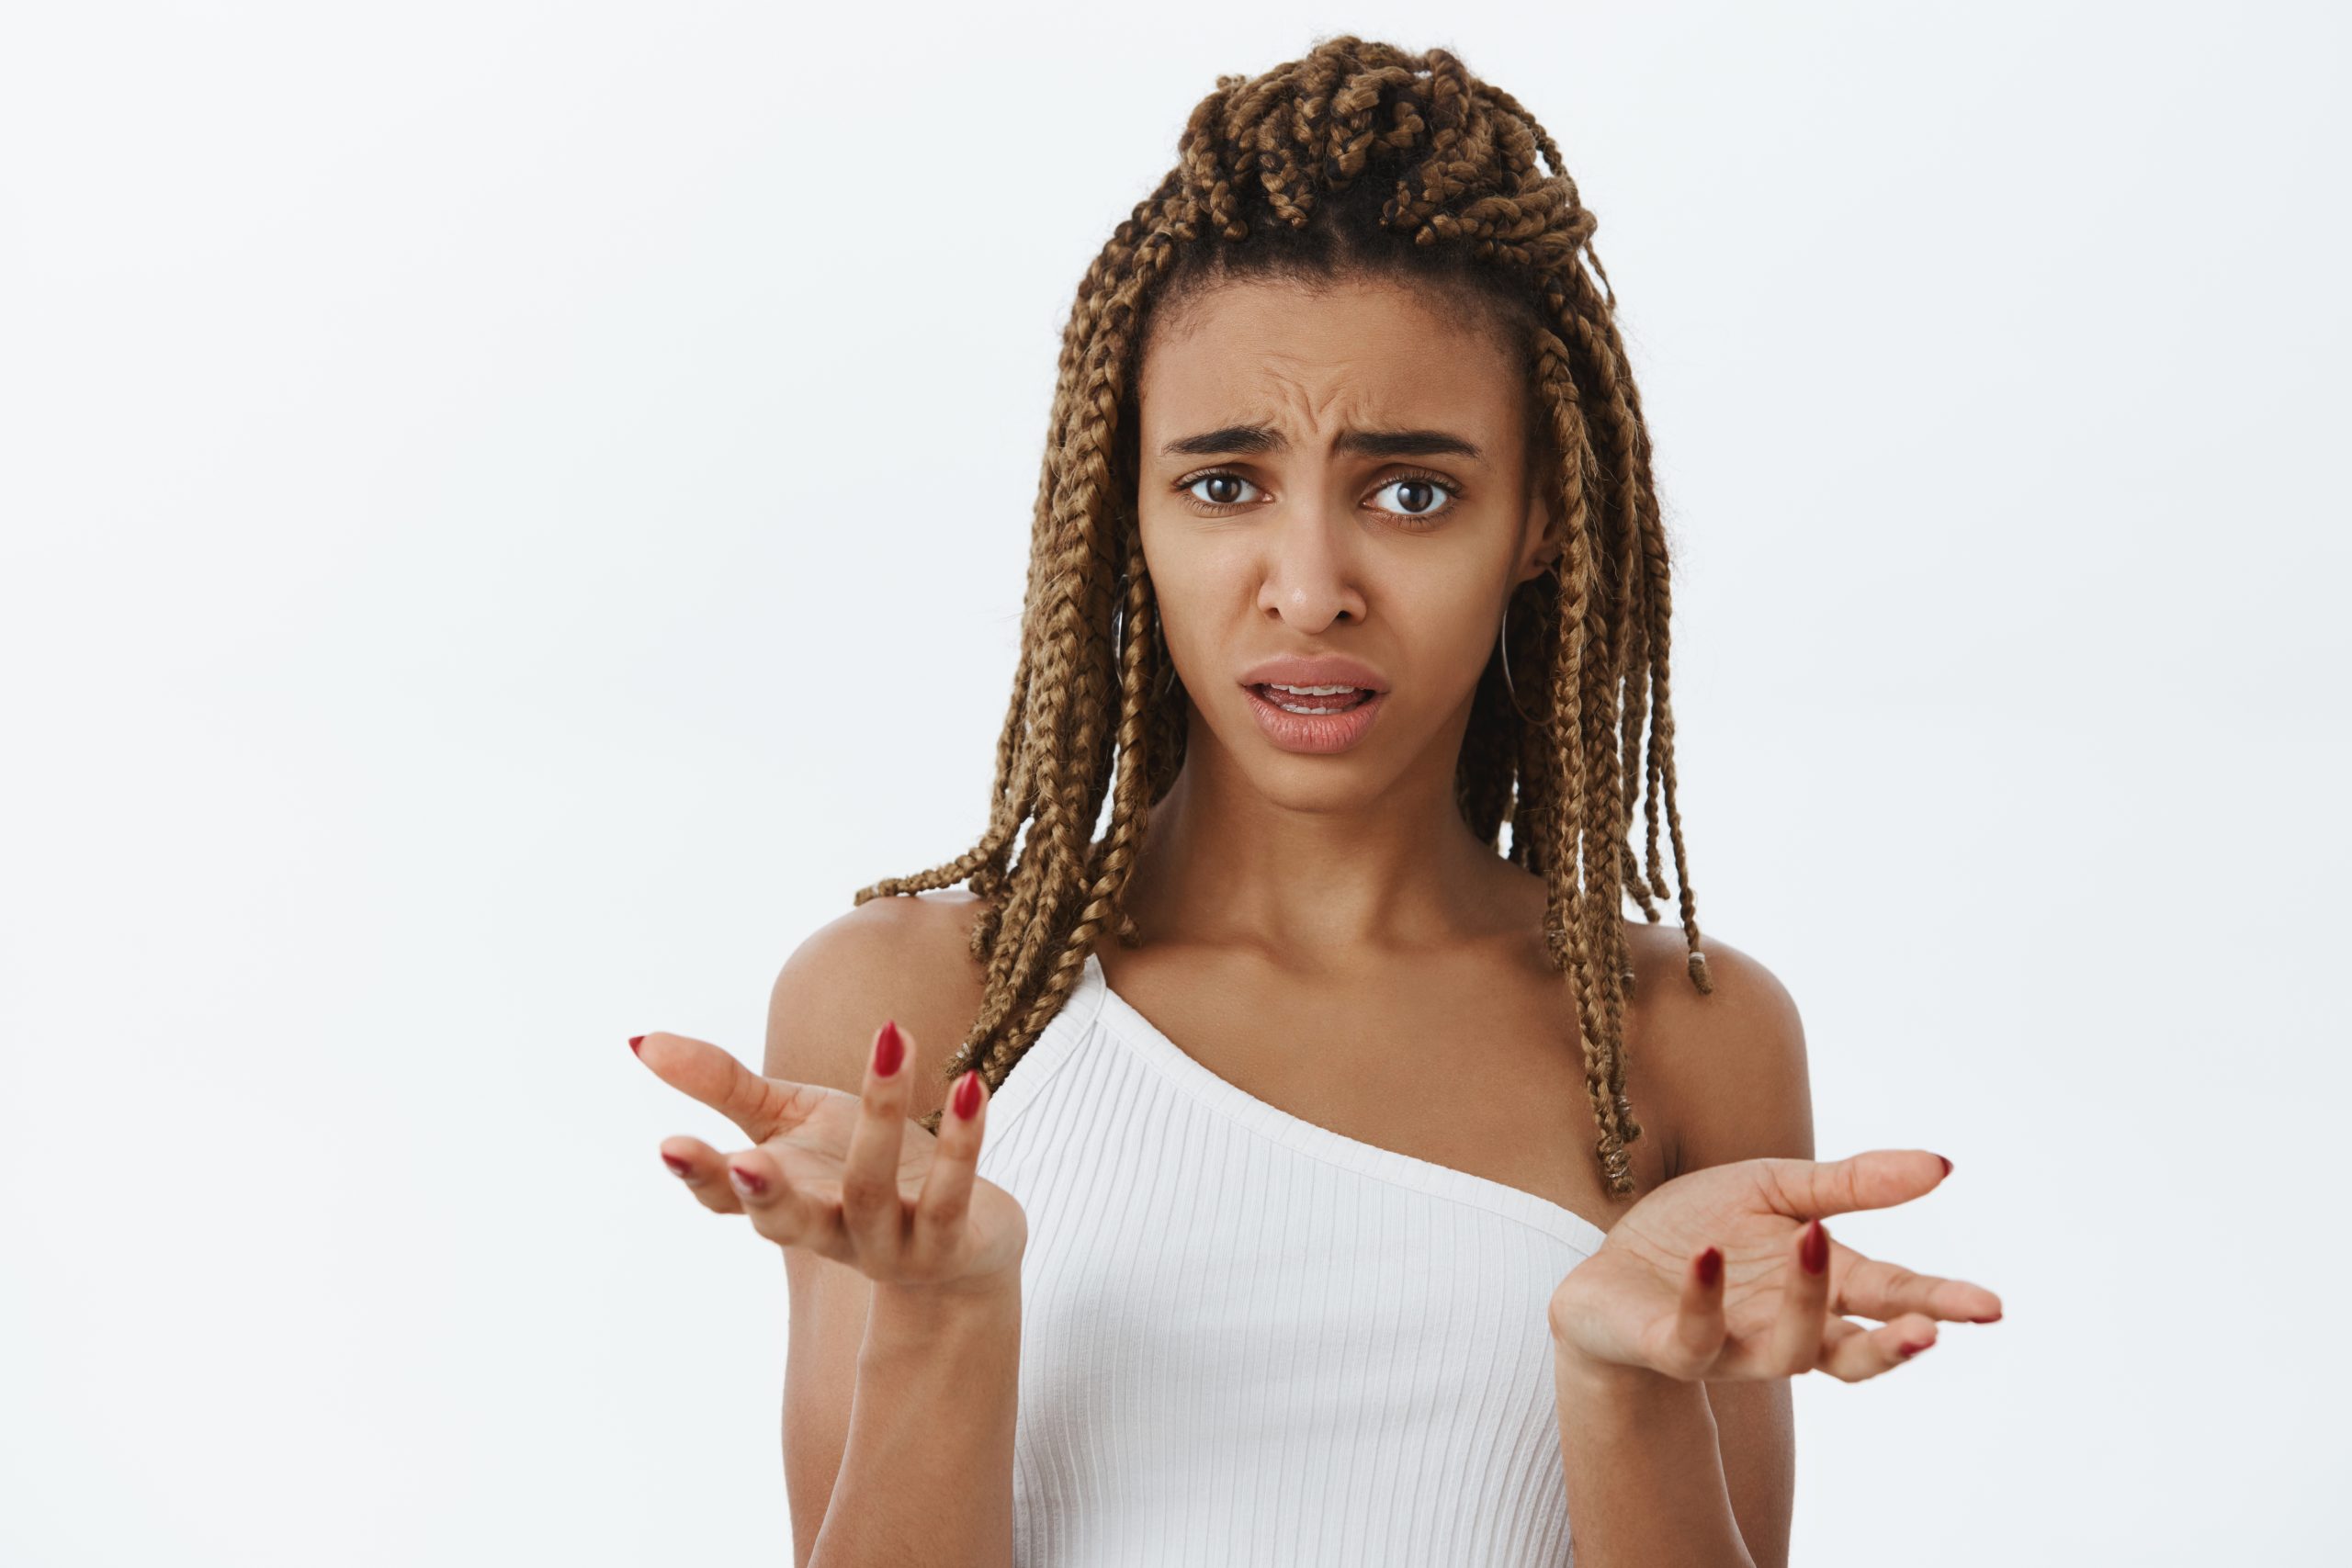 woman-feeling-confused-cannot-understand-what-friend-hinting-at-portrait-of-clueless-and-questioned-unaware-dark-skinned-female-with-dreads-feeling-intense-shrugging-with-raised-arms-and-frowning